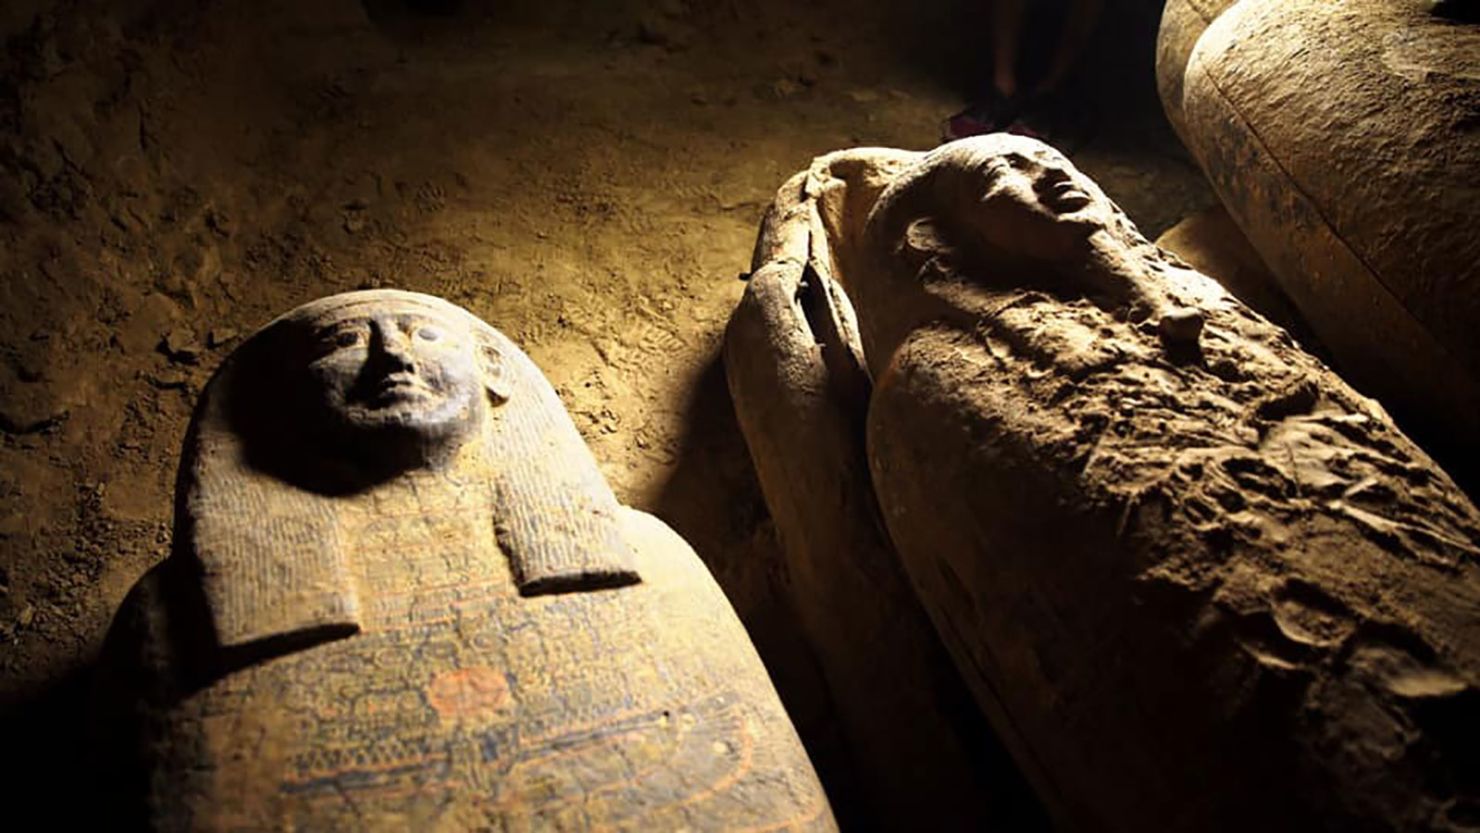 The coffins are so well-preserved that the original, detailed designs are still clearly visible.